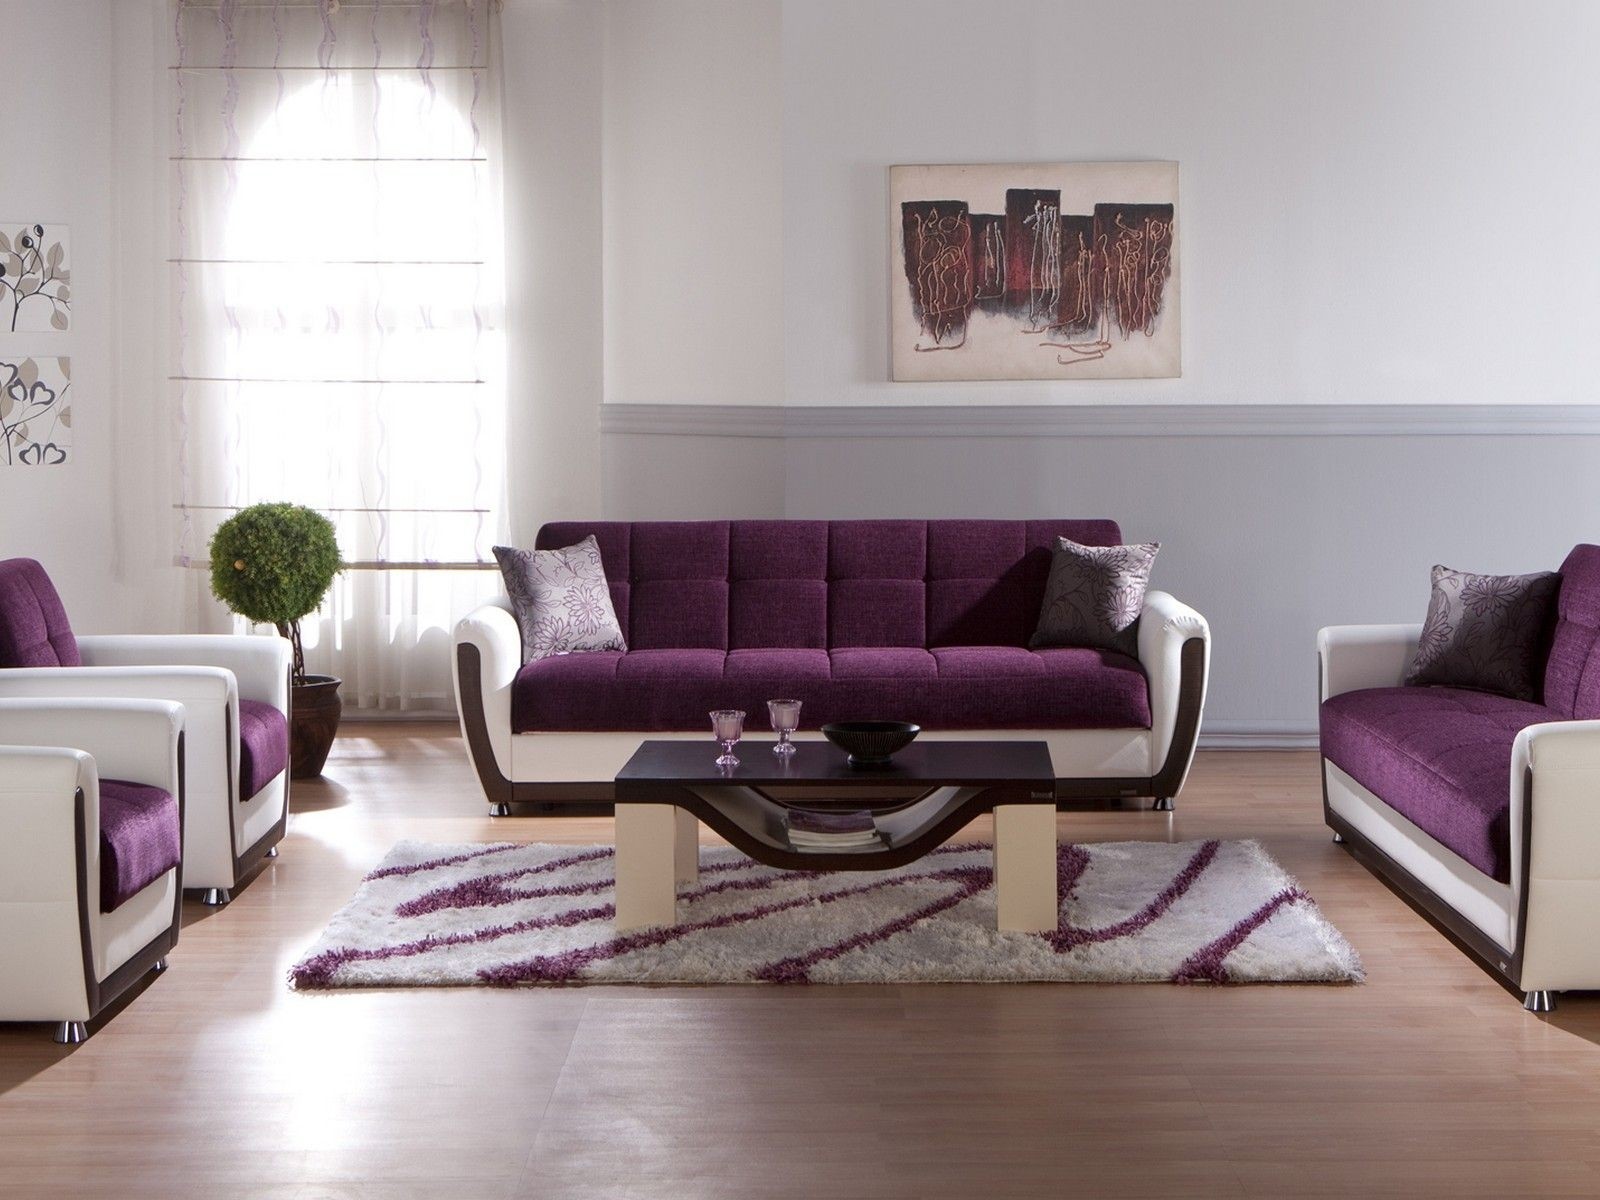 Wonderful purple and white modern living room sets with